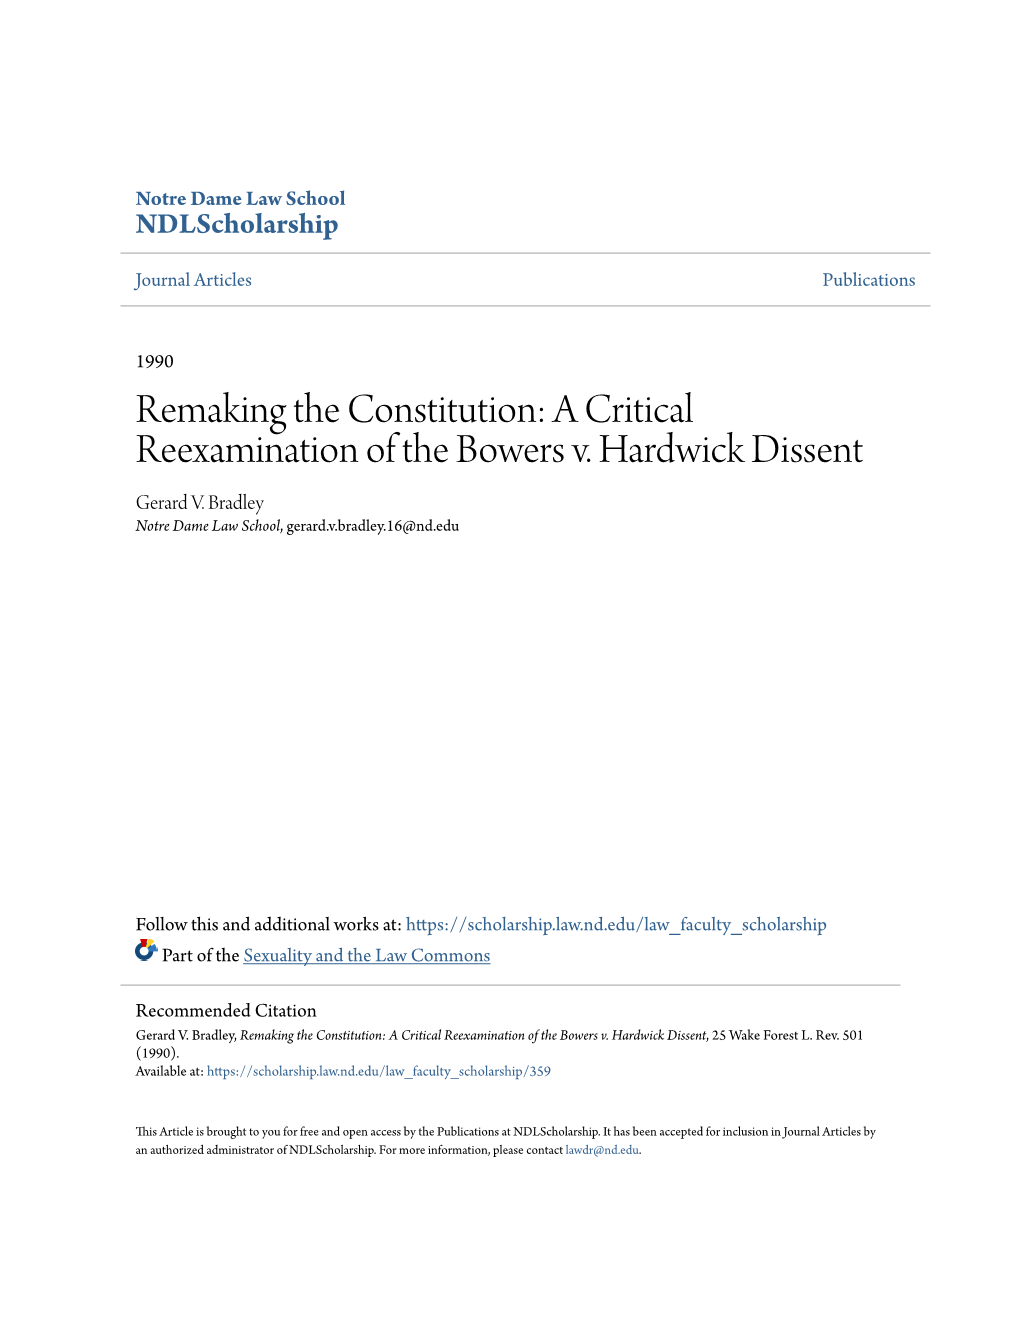 A Critical Reexamination of the Bowers V